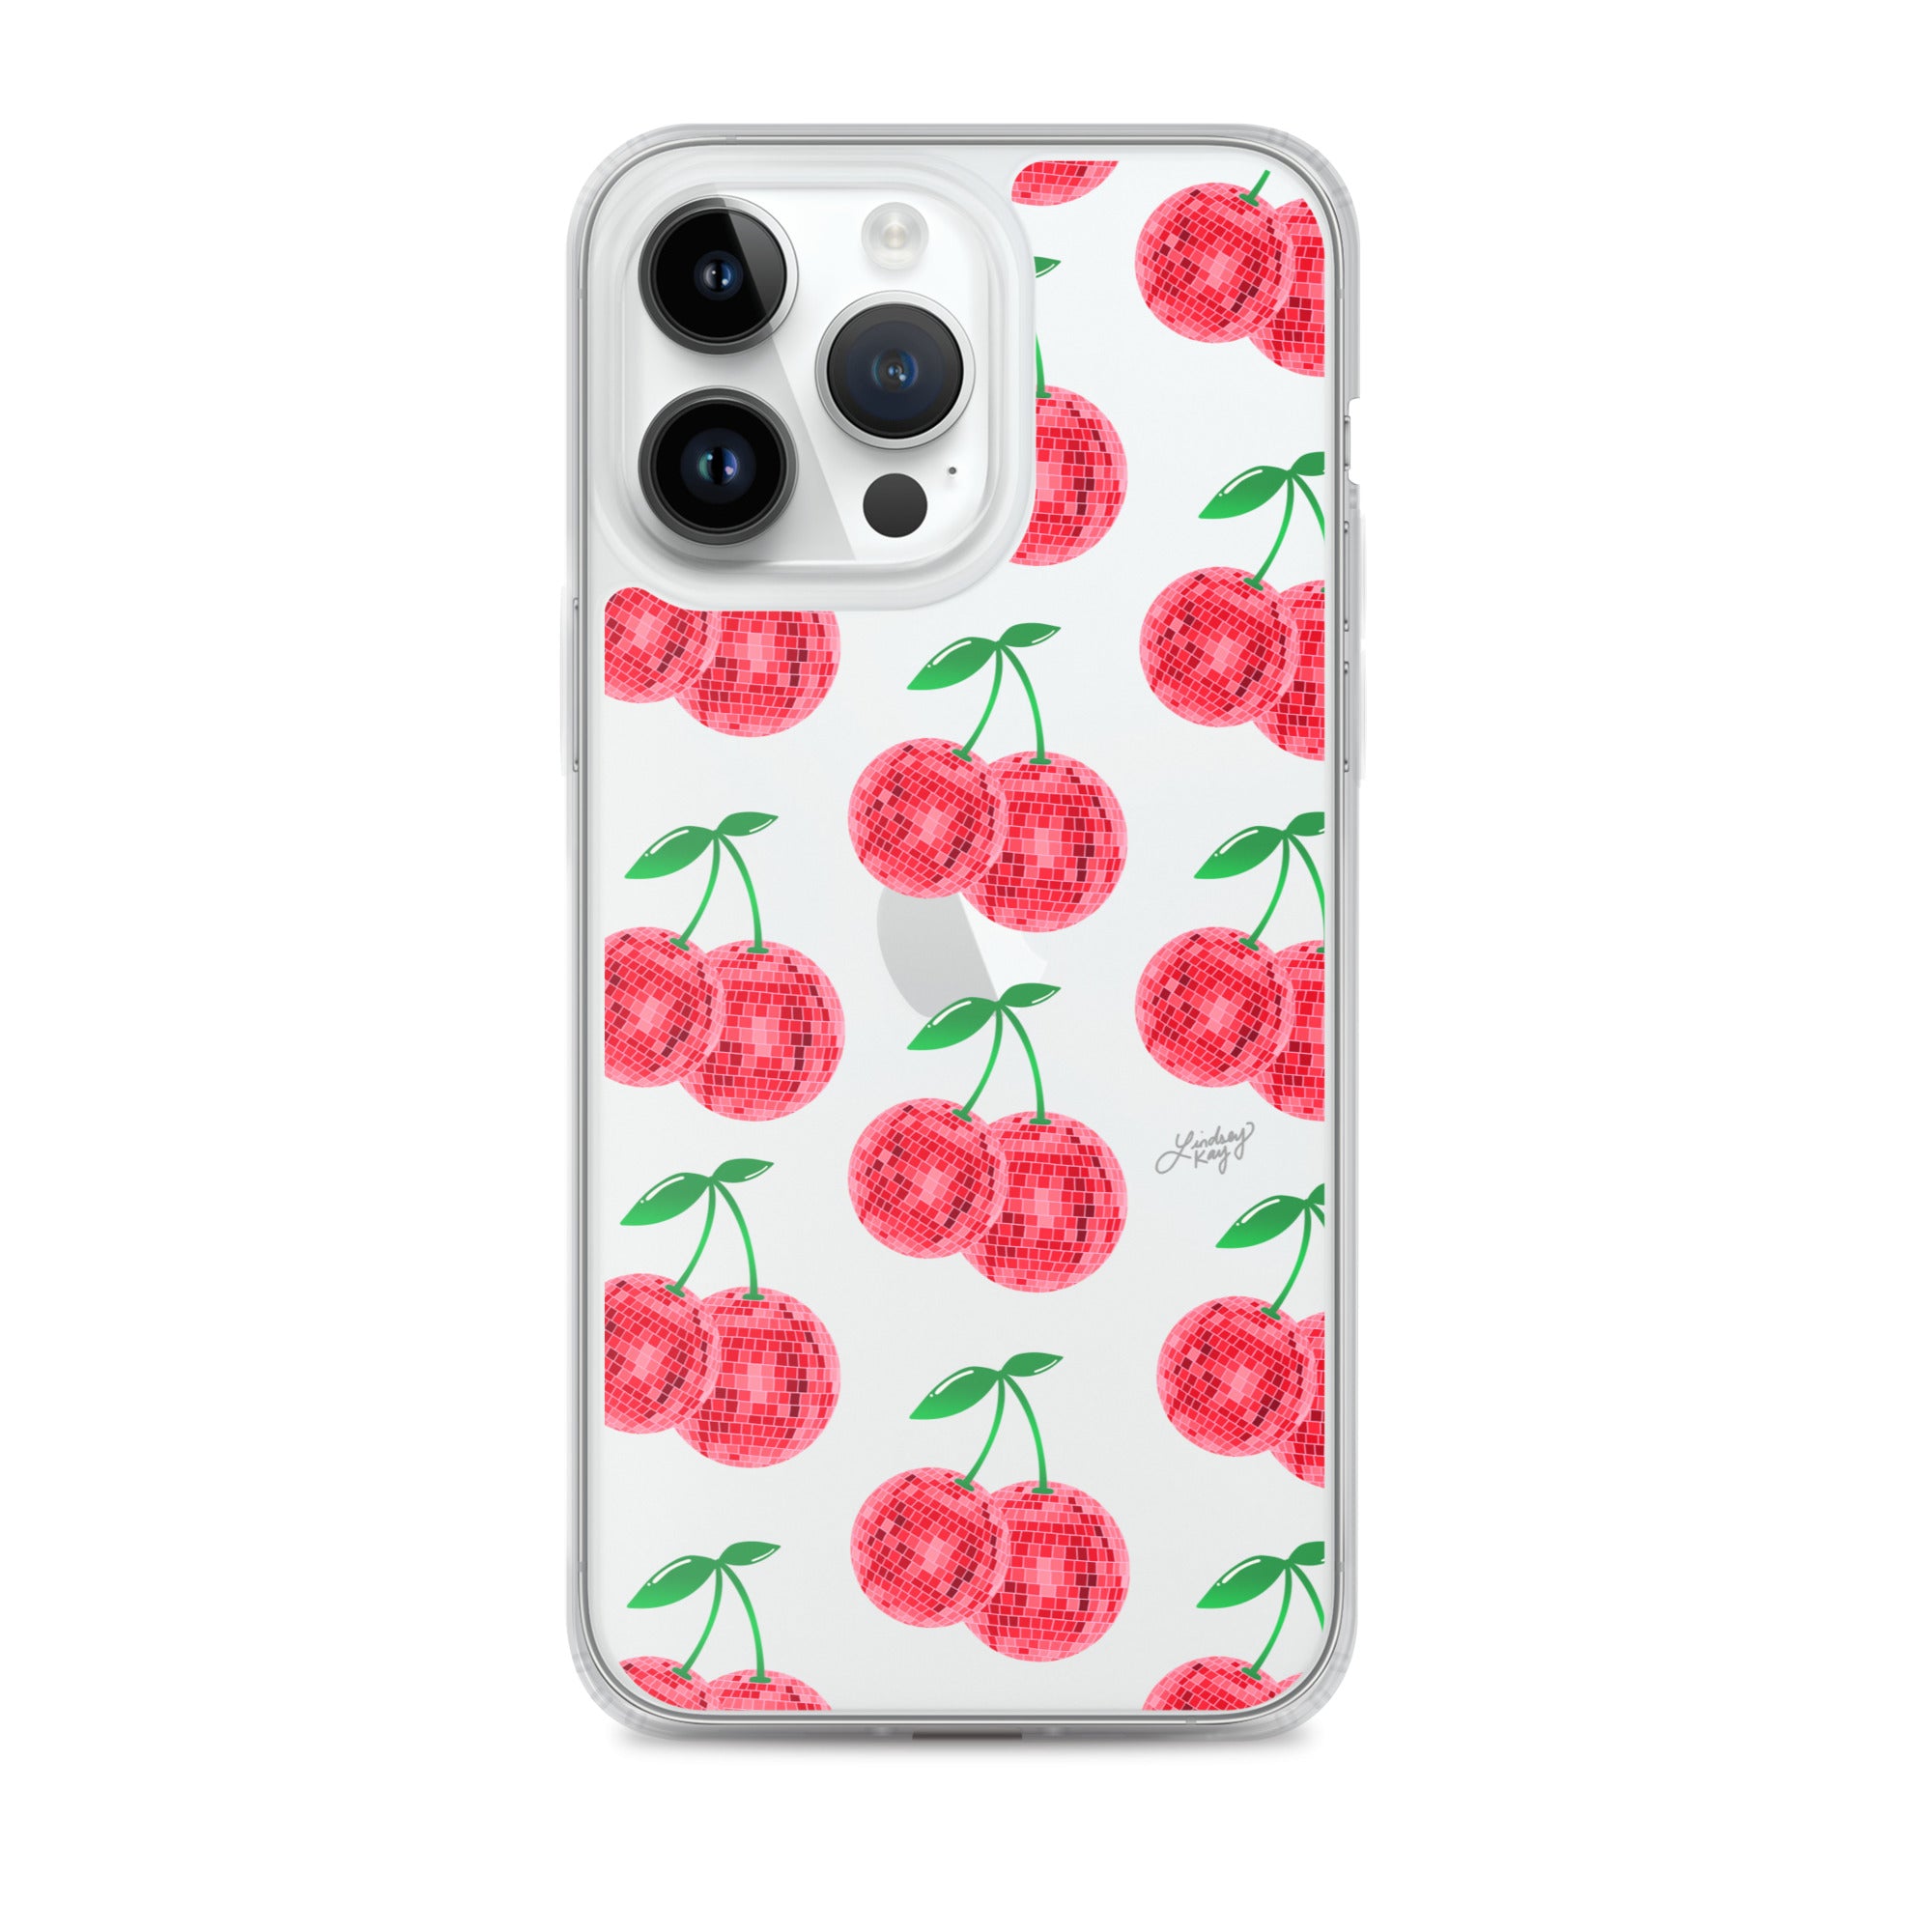 red disco ball cherries clear iphone case protector funky retro illustration phone case accessories lindsey kay collective